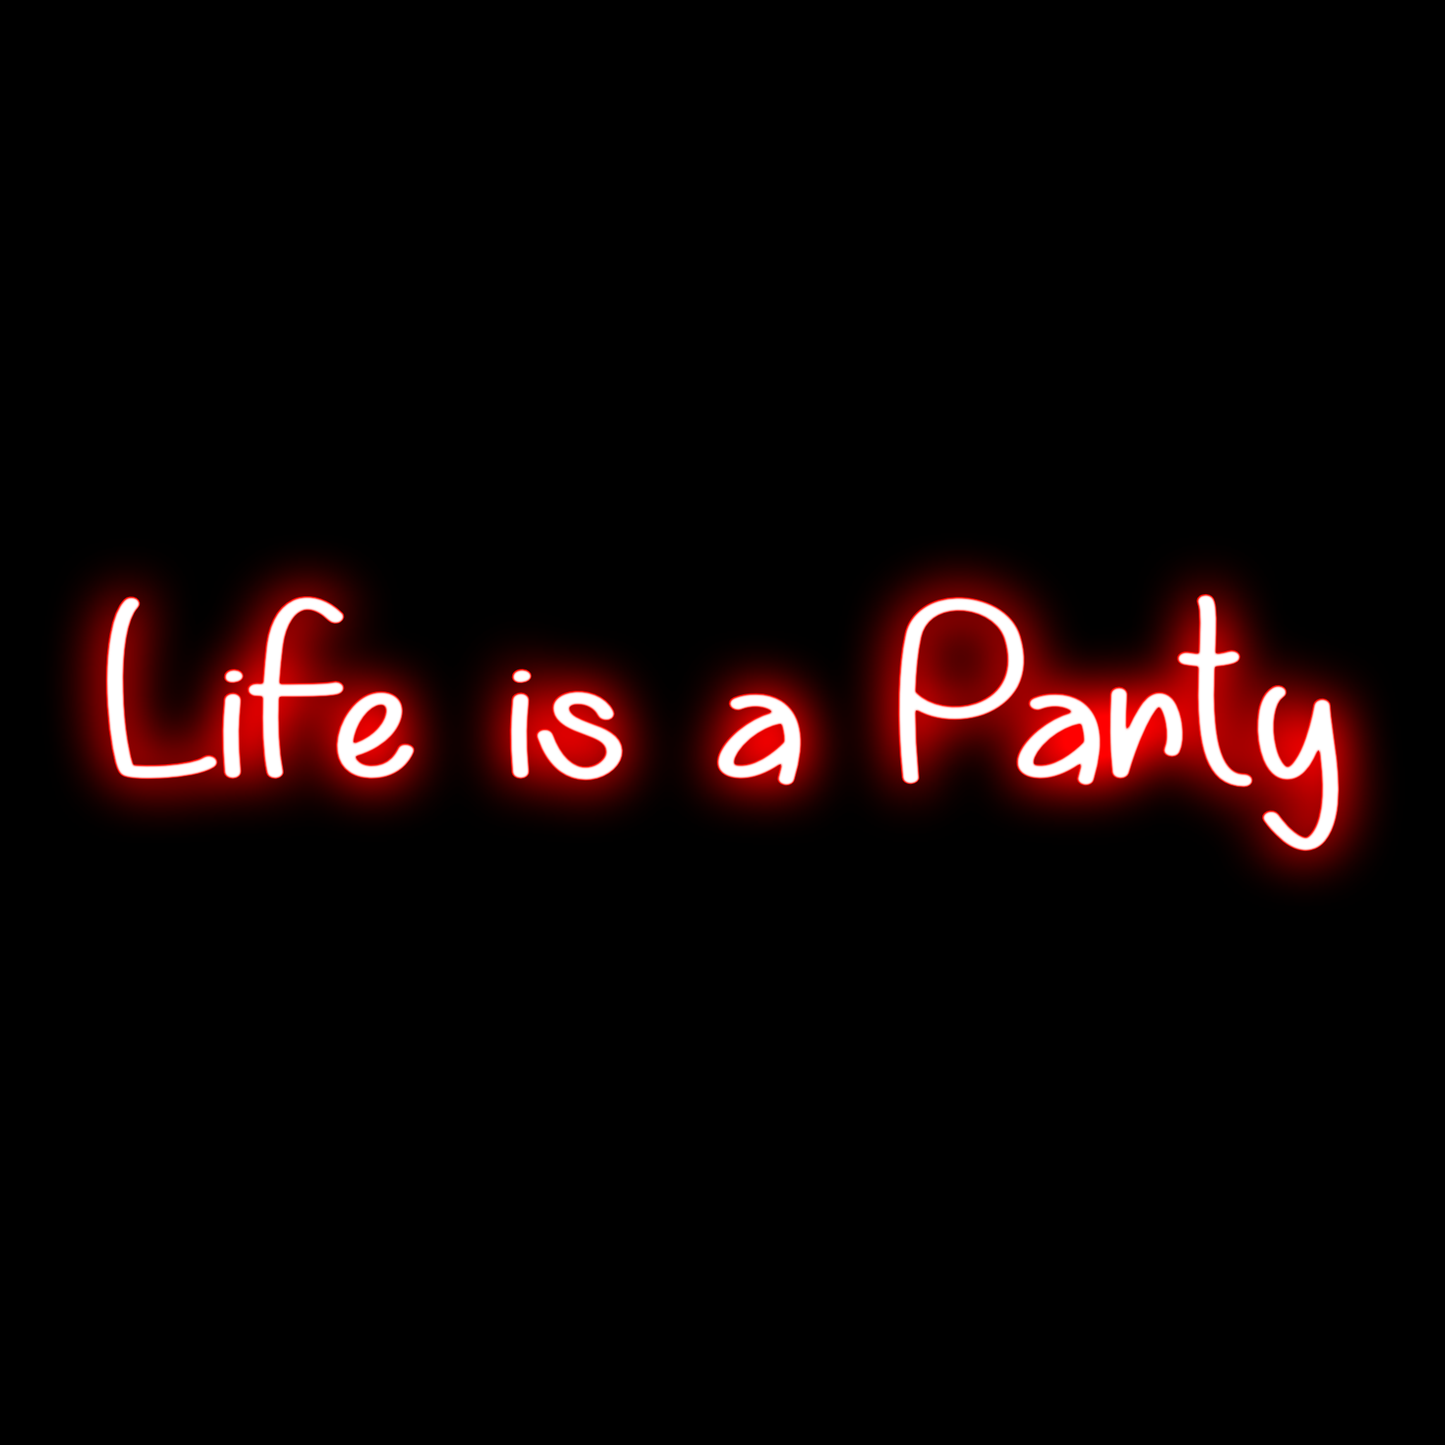 Life is a Party